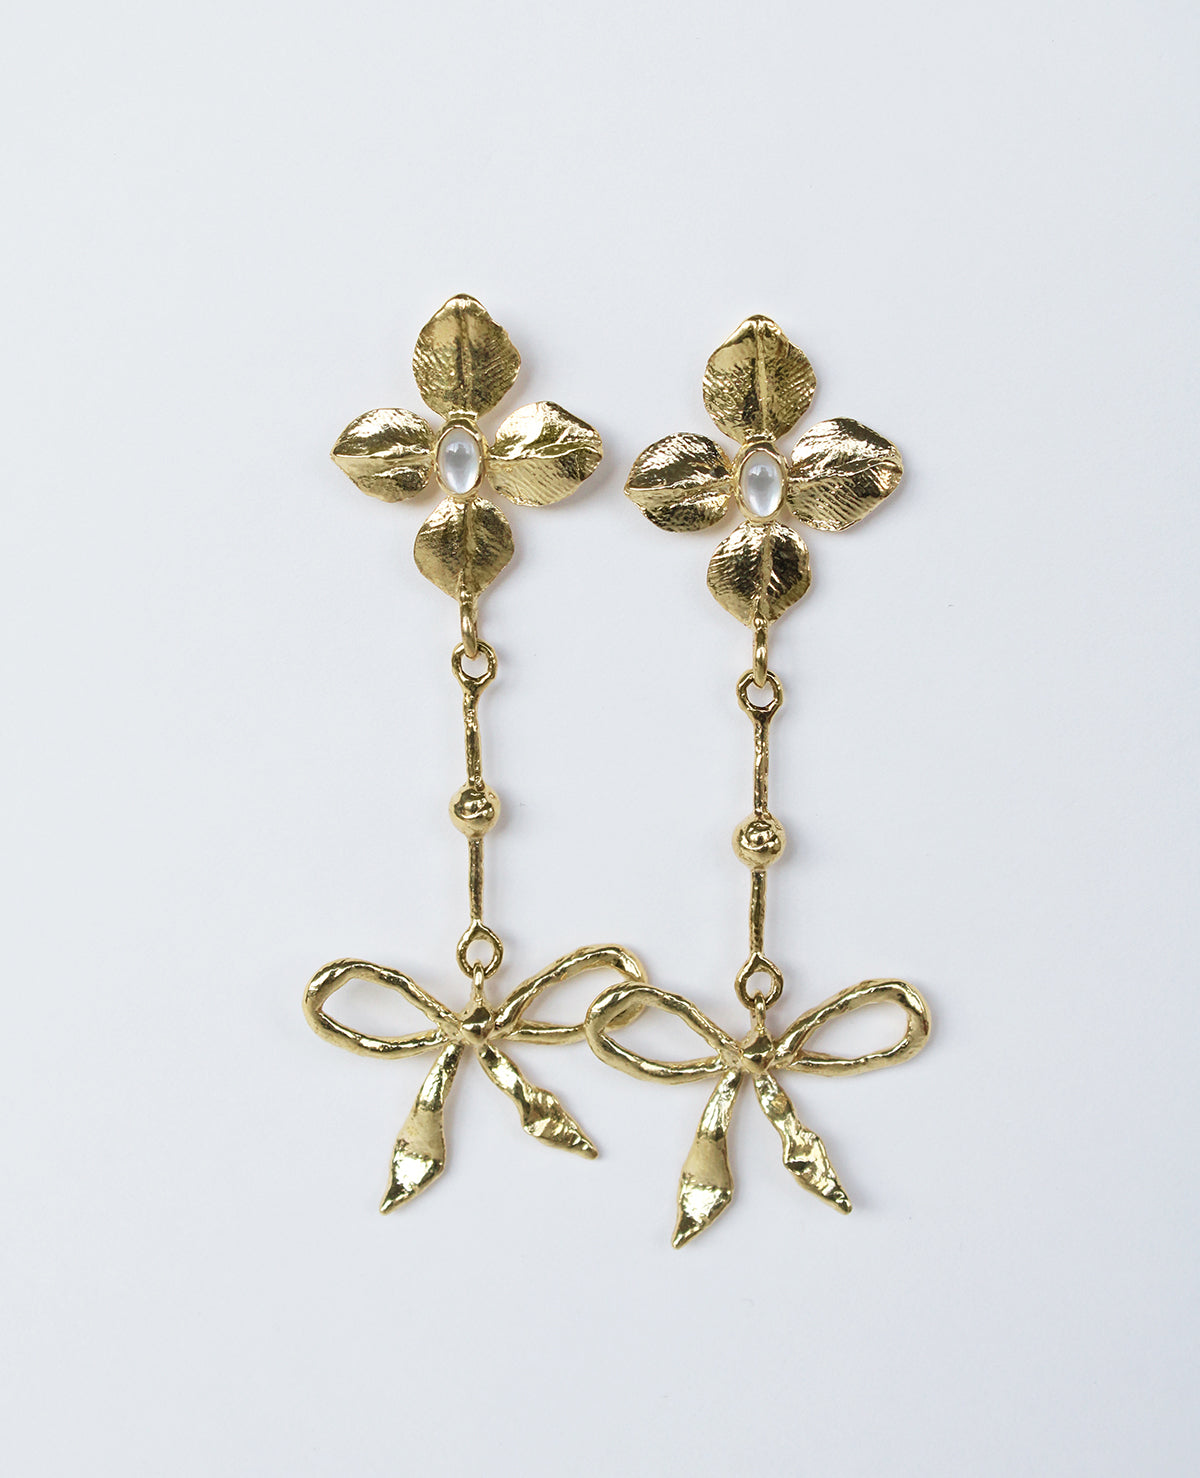 WILLOW BOW // golden earrings - ORA-C jewelry - handmade jewelry by Montreal based independent designer Caroline Pham